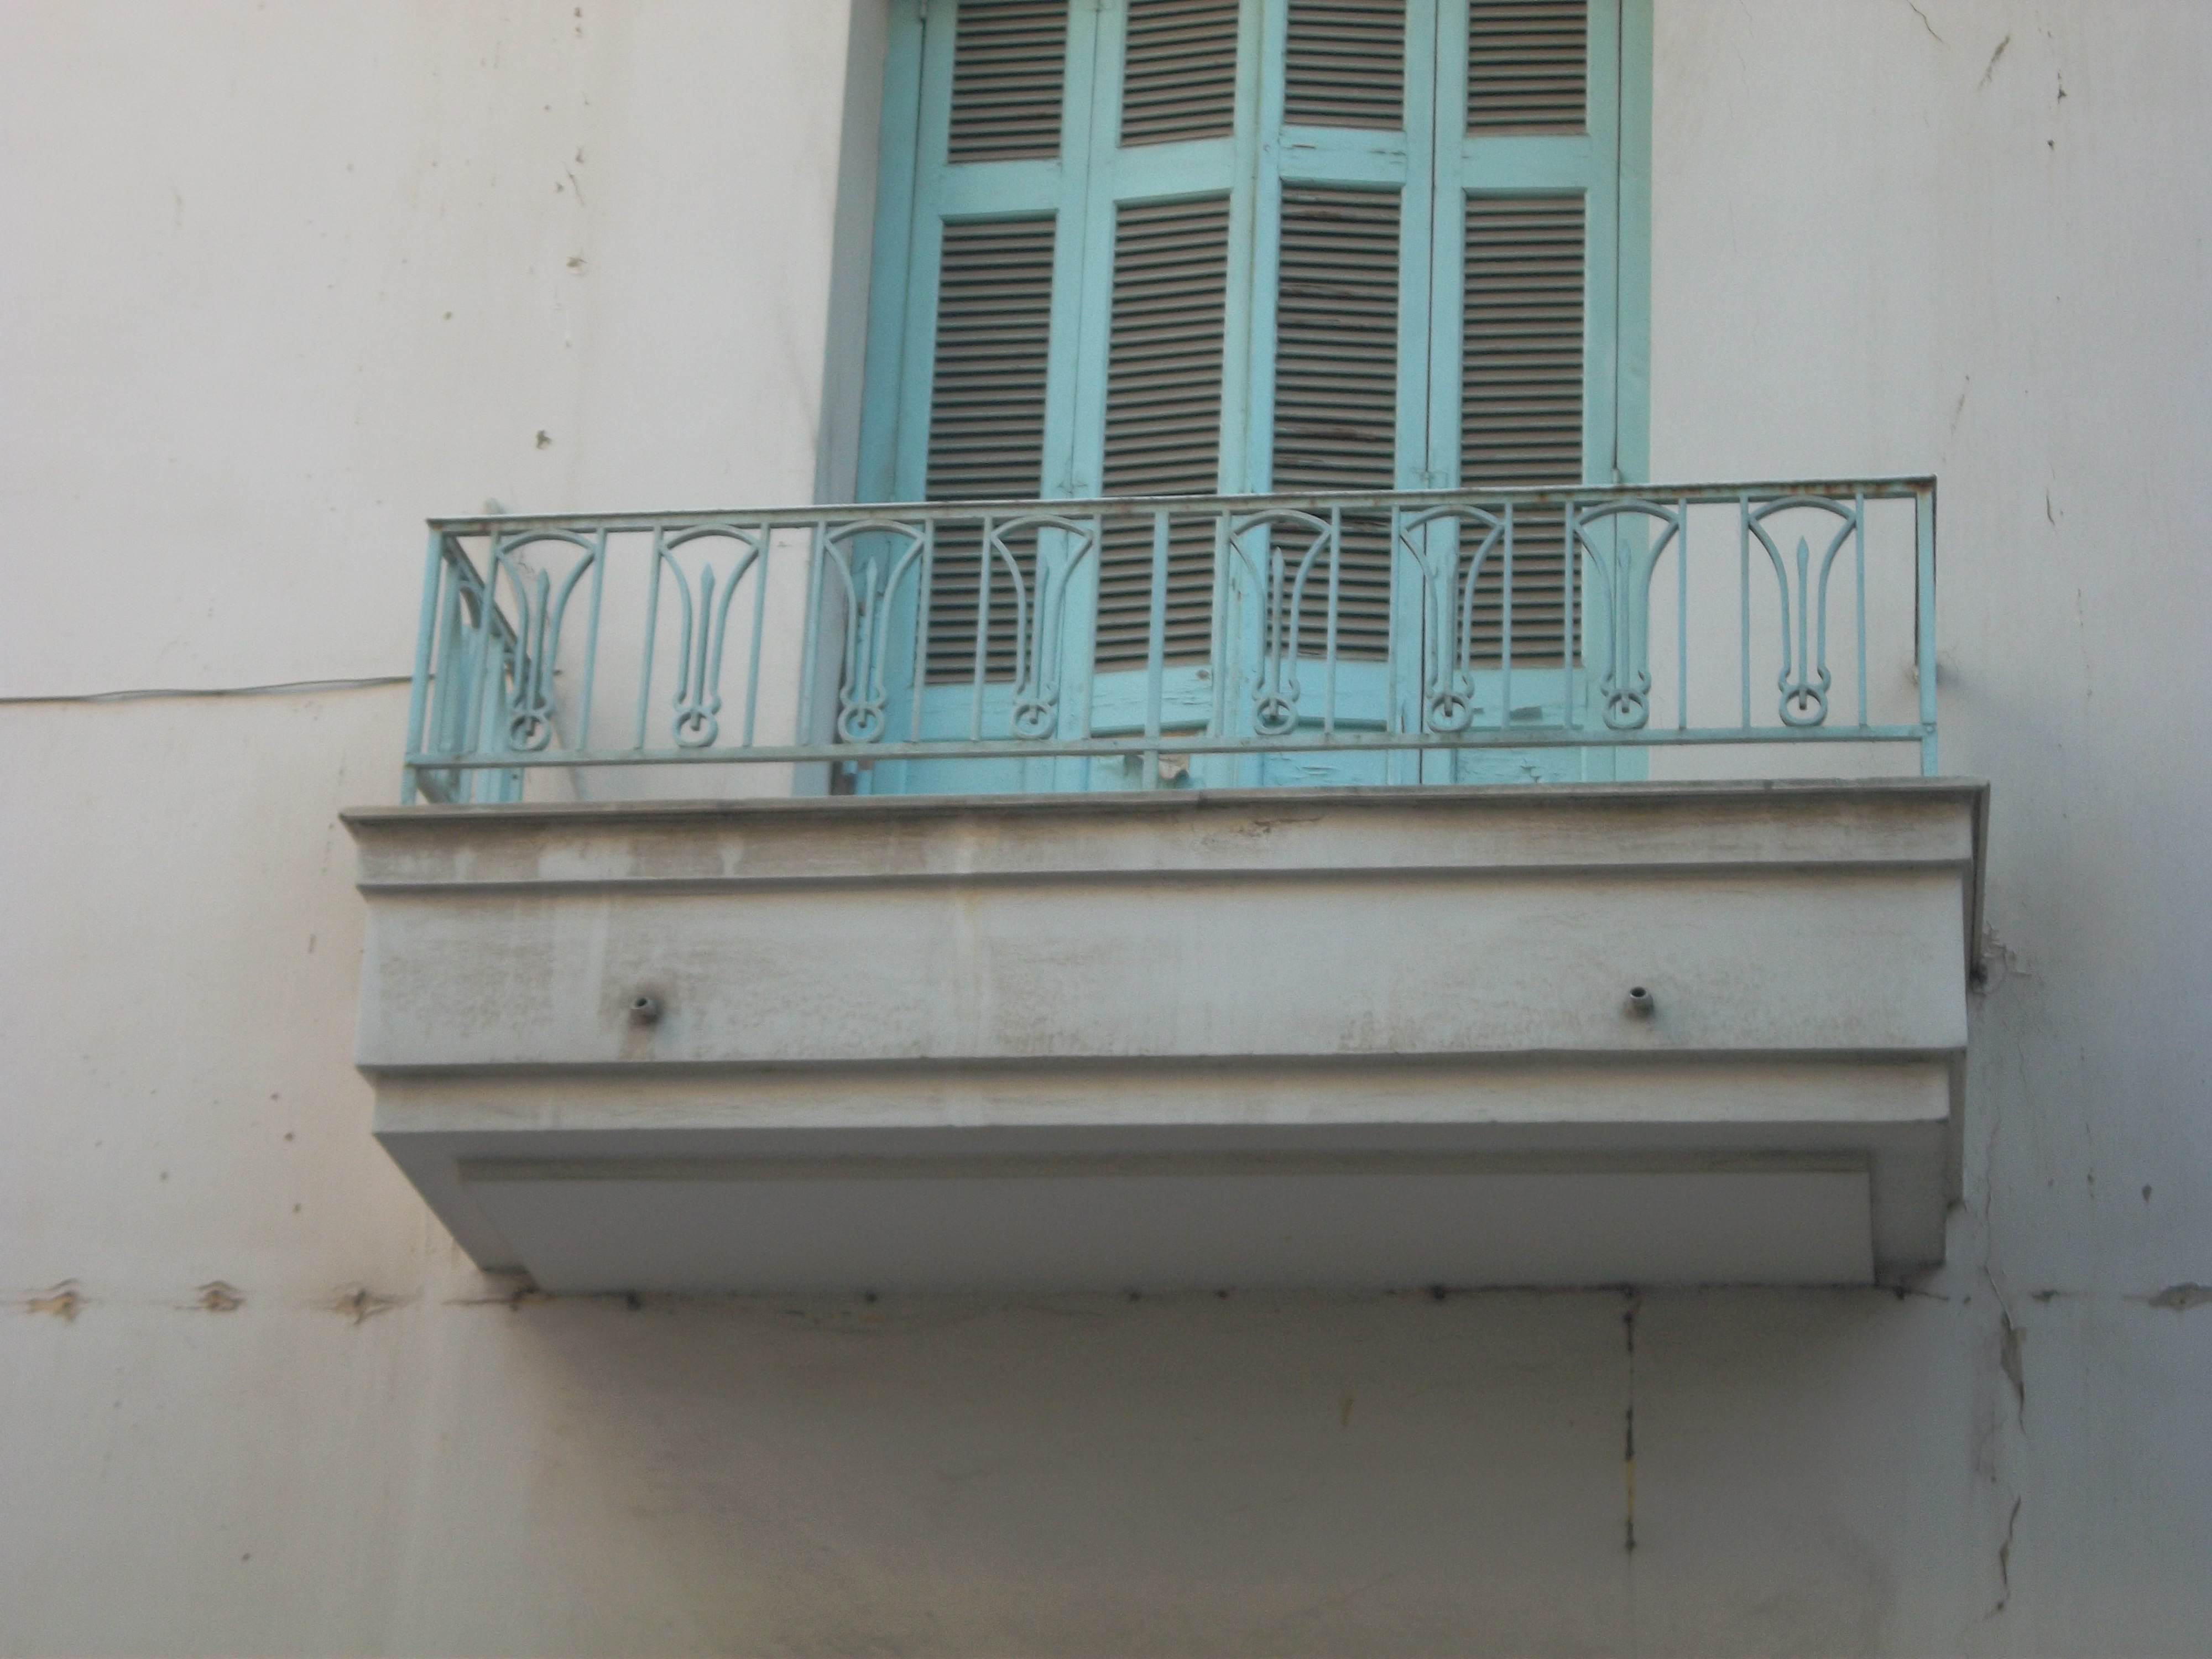 Detail of the facade with the balcony (2013)